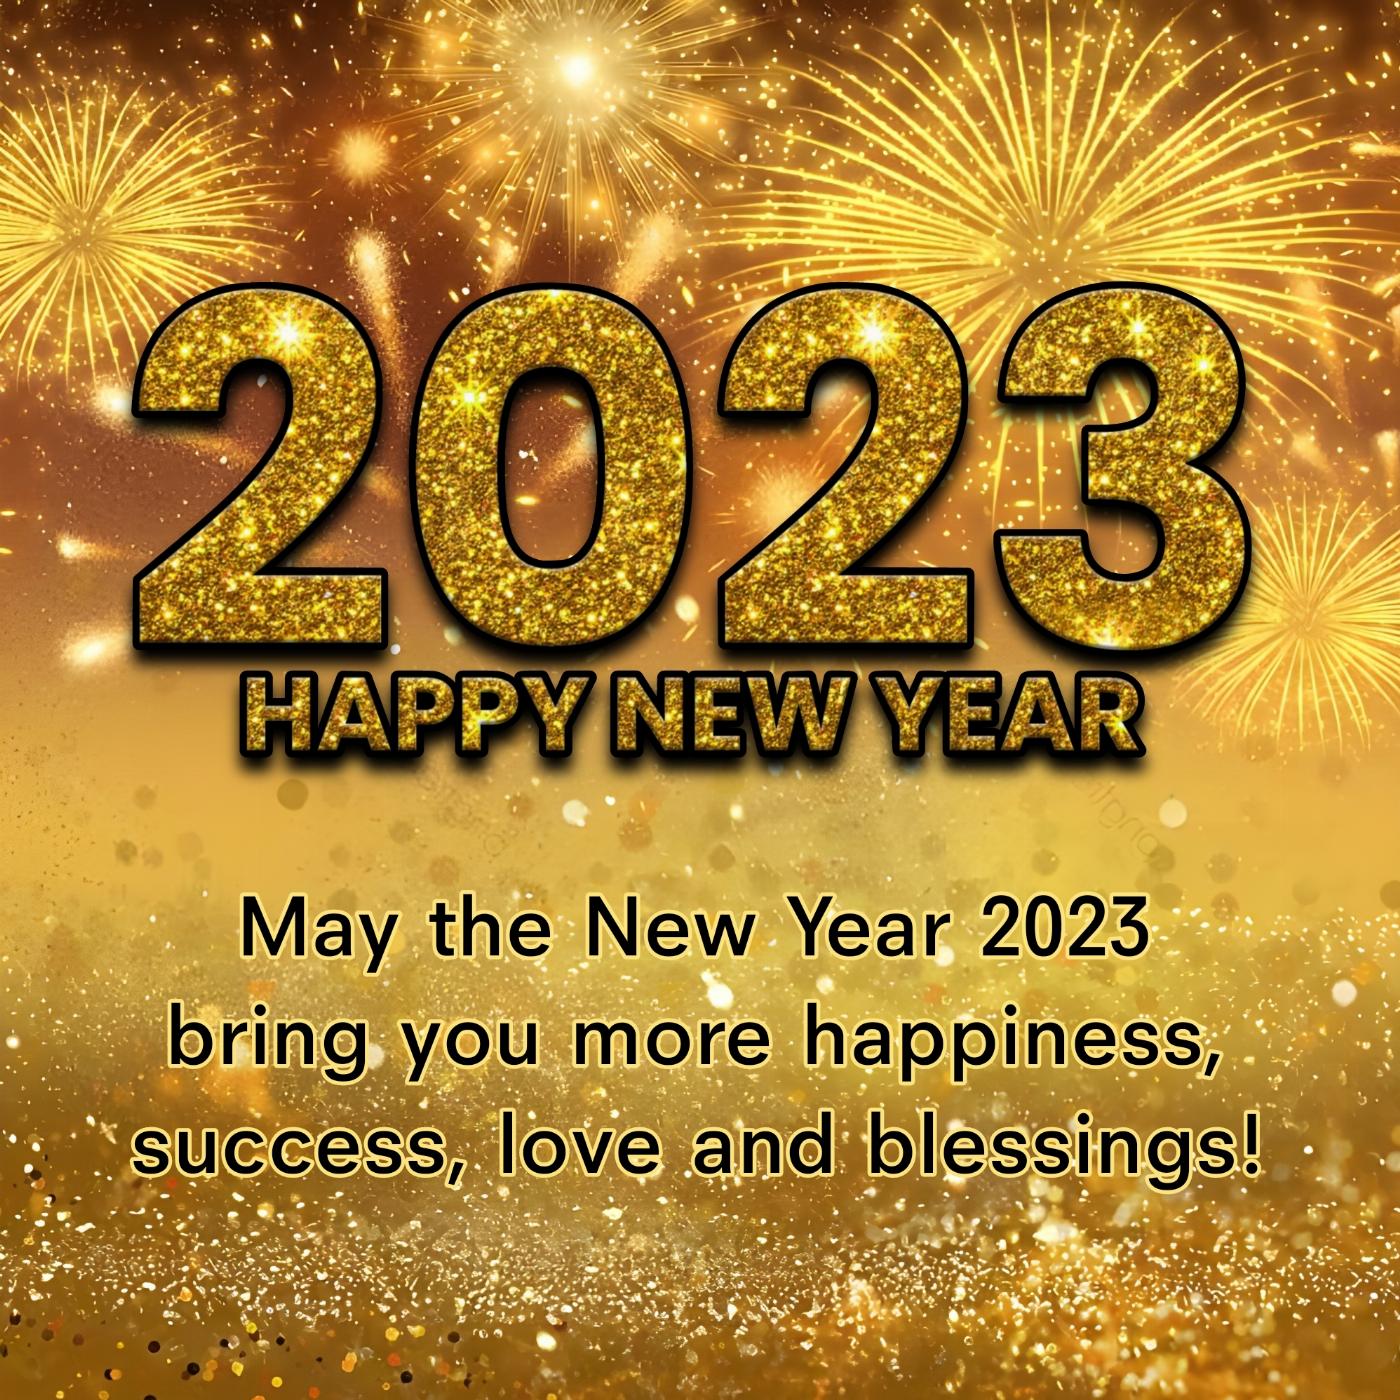 May the New Year 2023 bring you more happiness